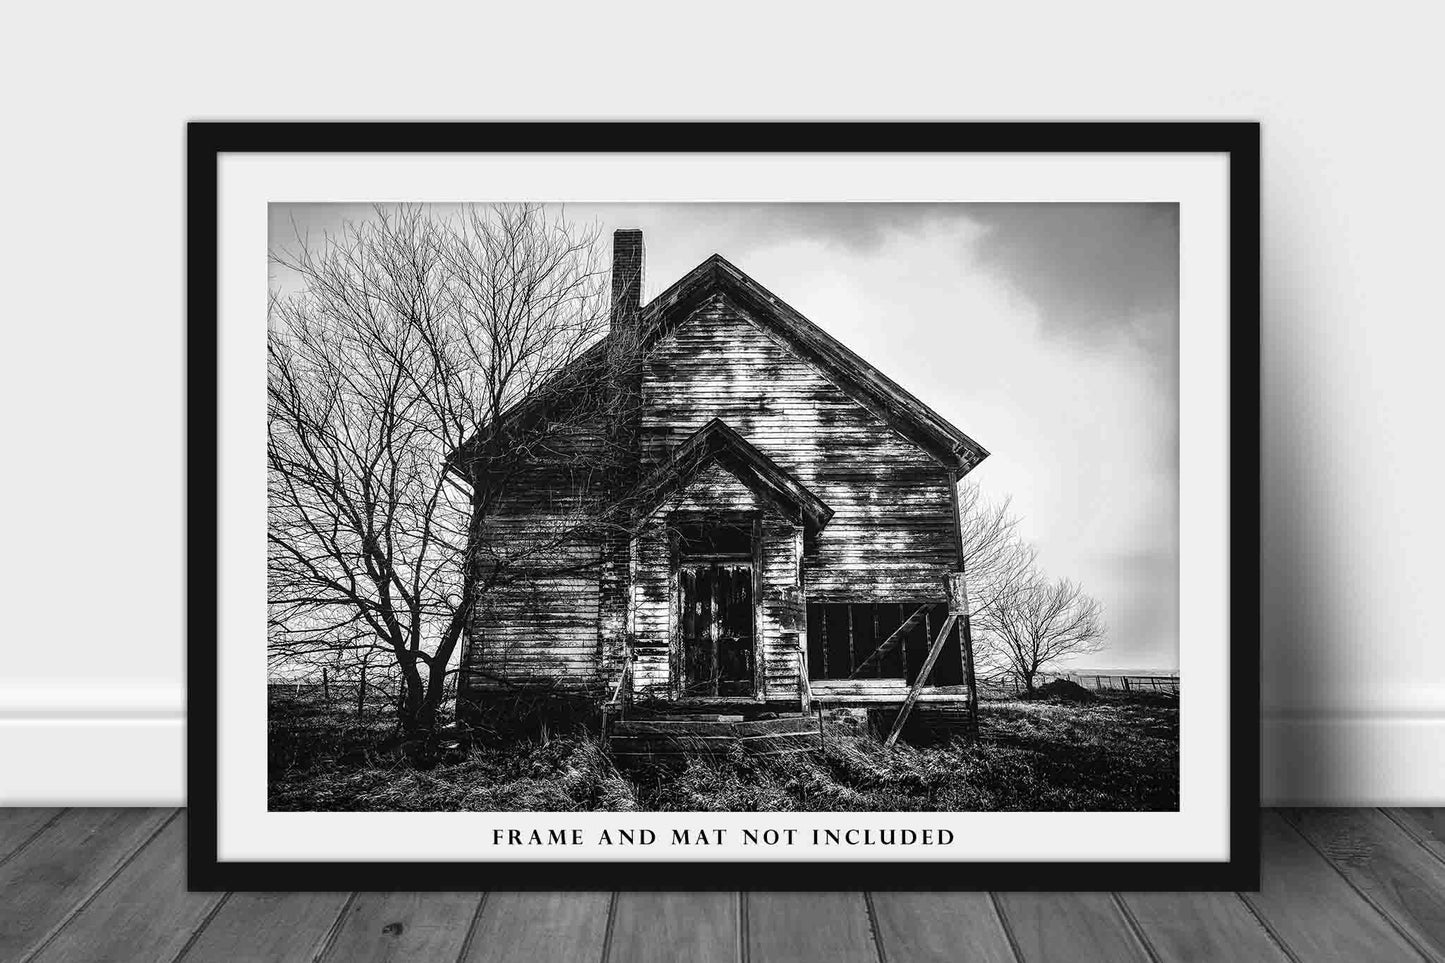 Black and White Photography Print - Picture of Old Abandoned School House in Iowa Fixer-Upper Shabby Chic Home Decor Wall Art Photo Artwork